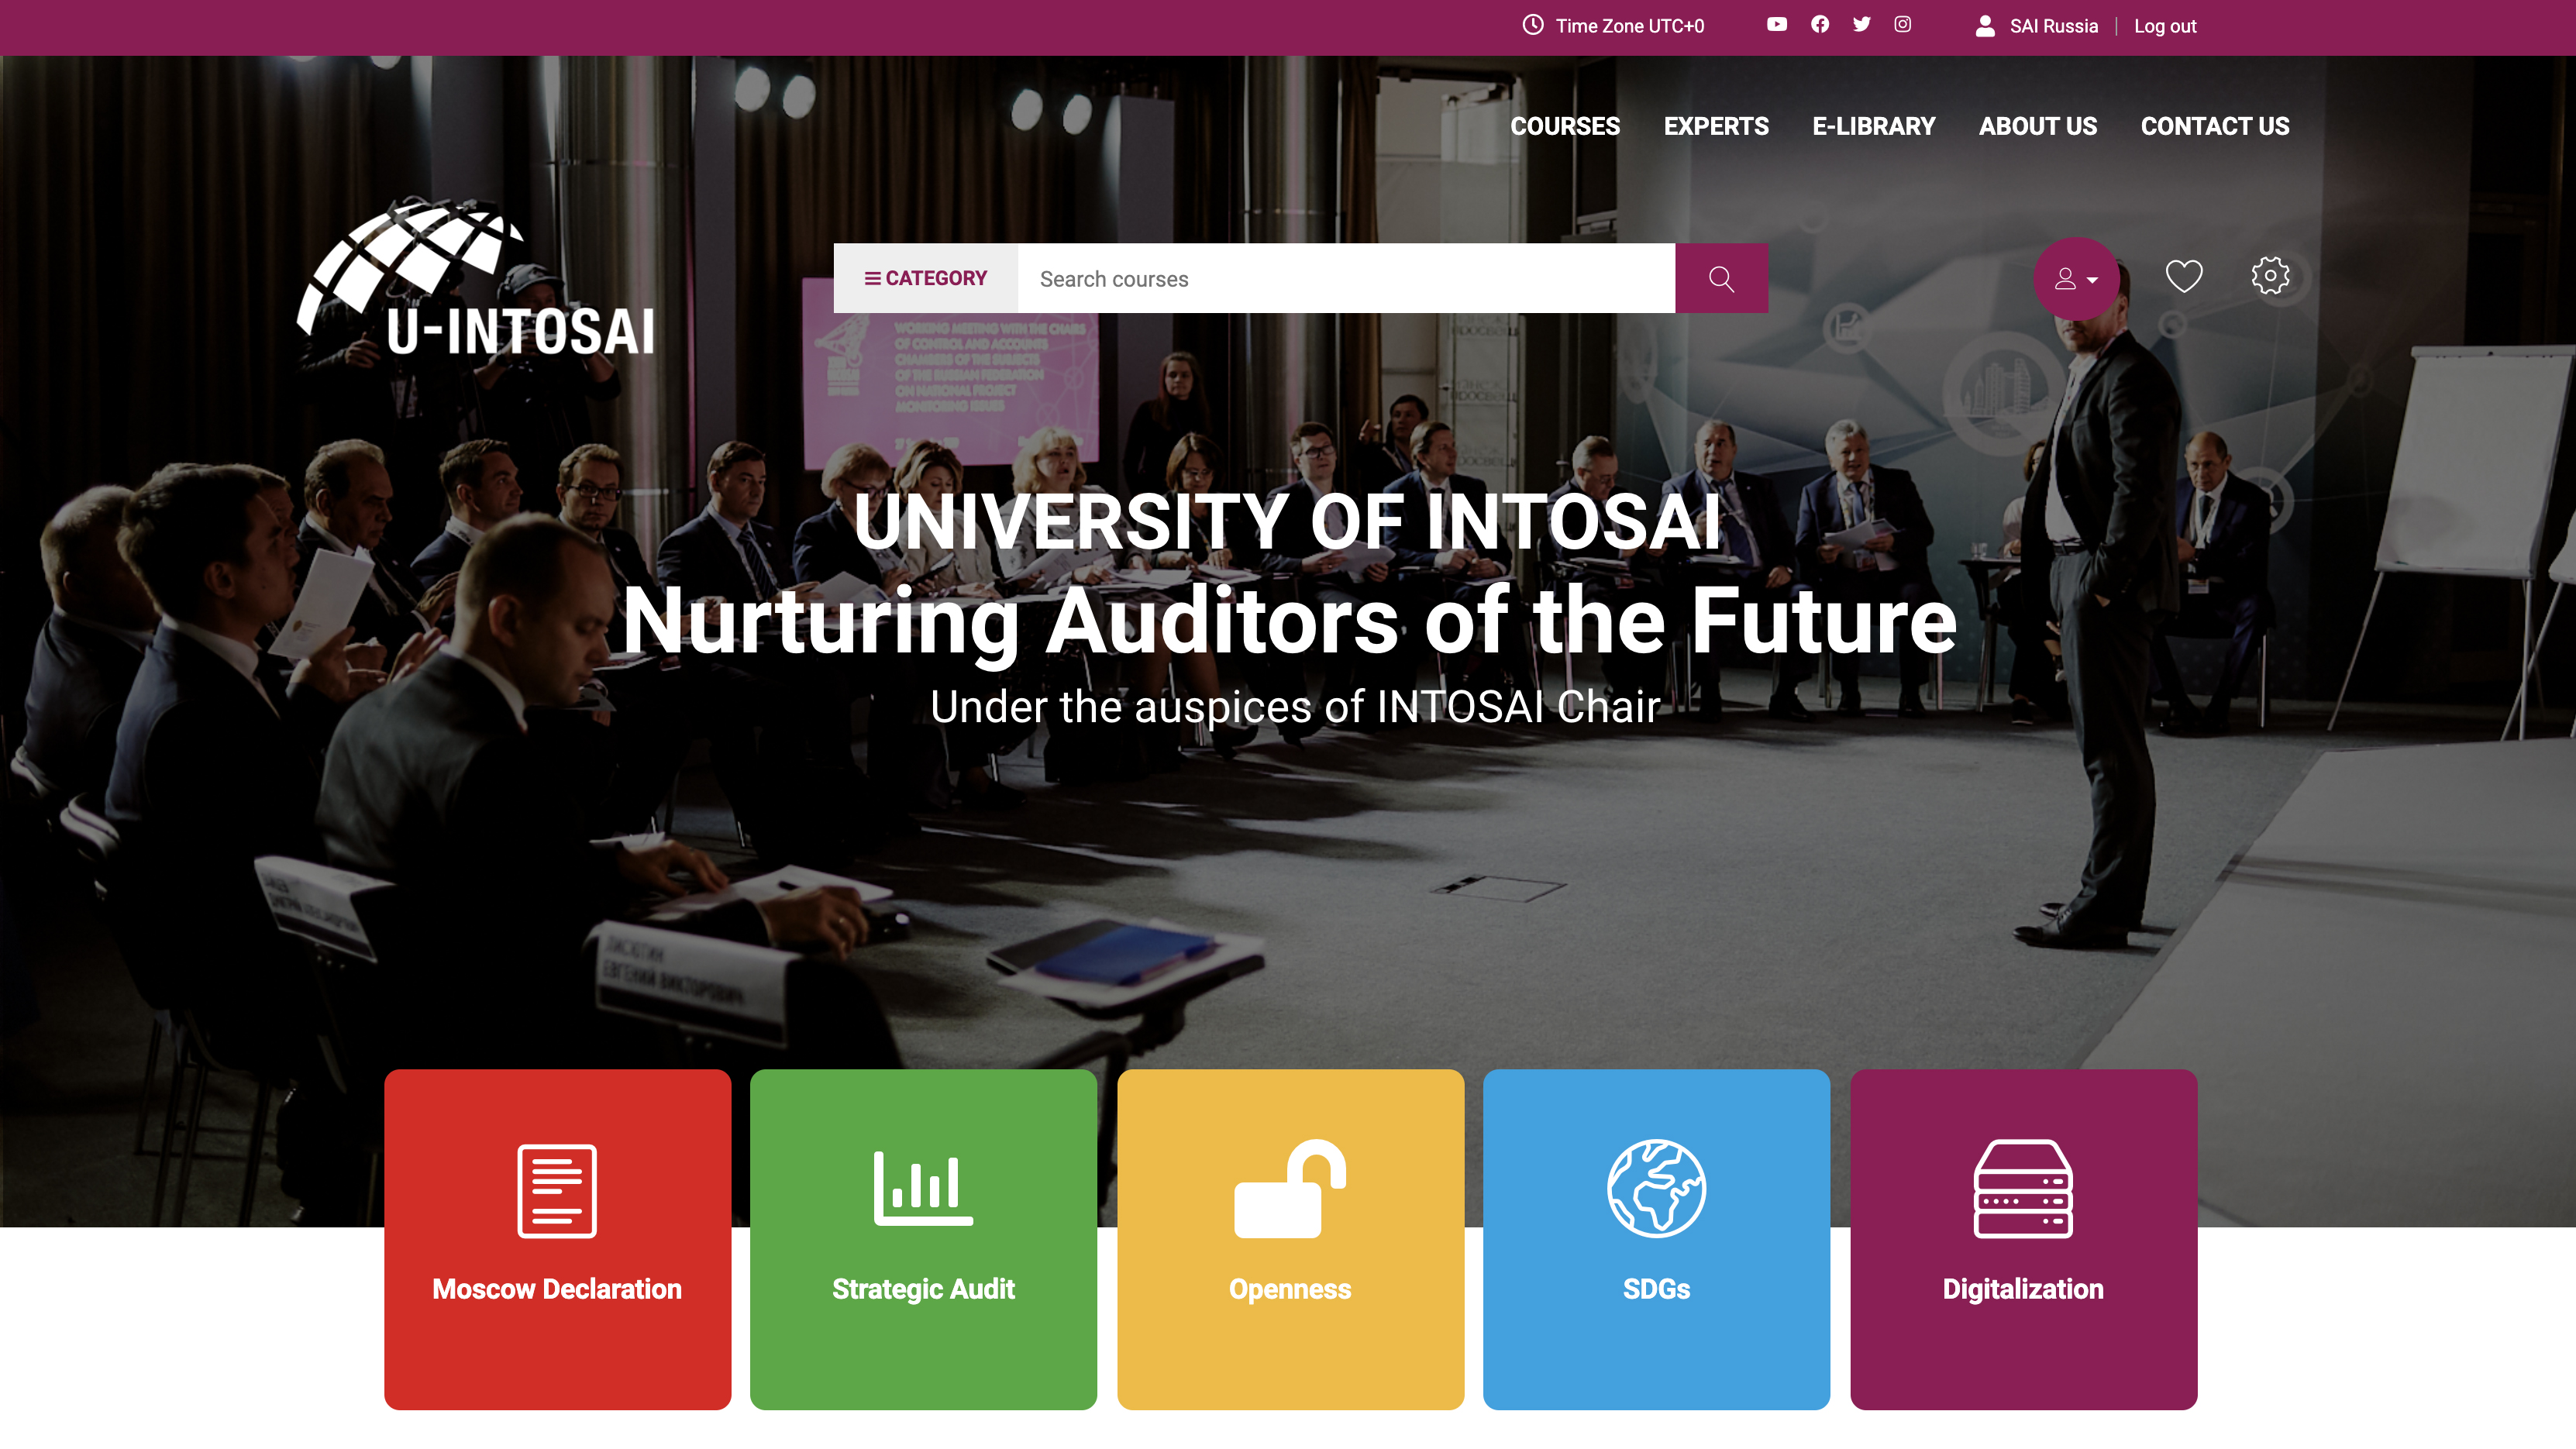 INTOSAI Chair launches the University of INTOSAI